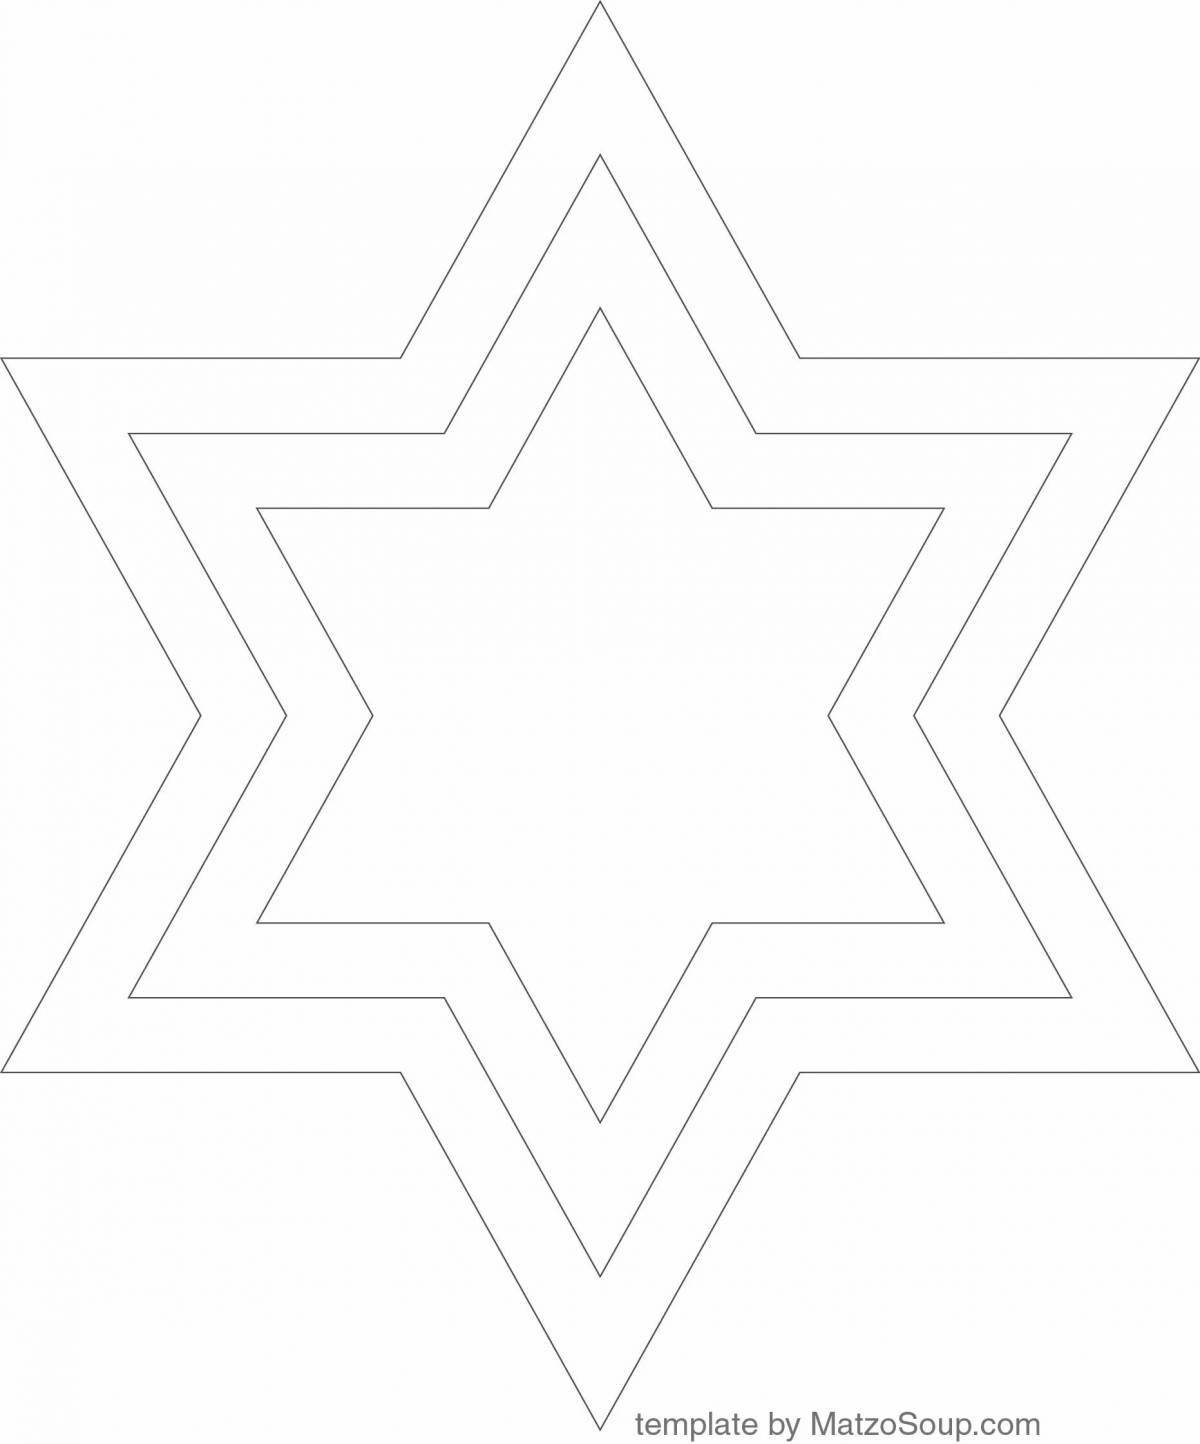 Coloring book glowing six-pointed star